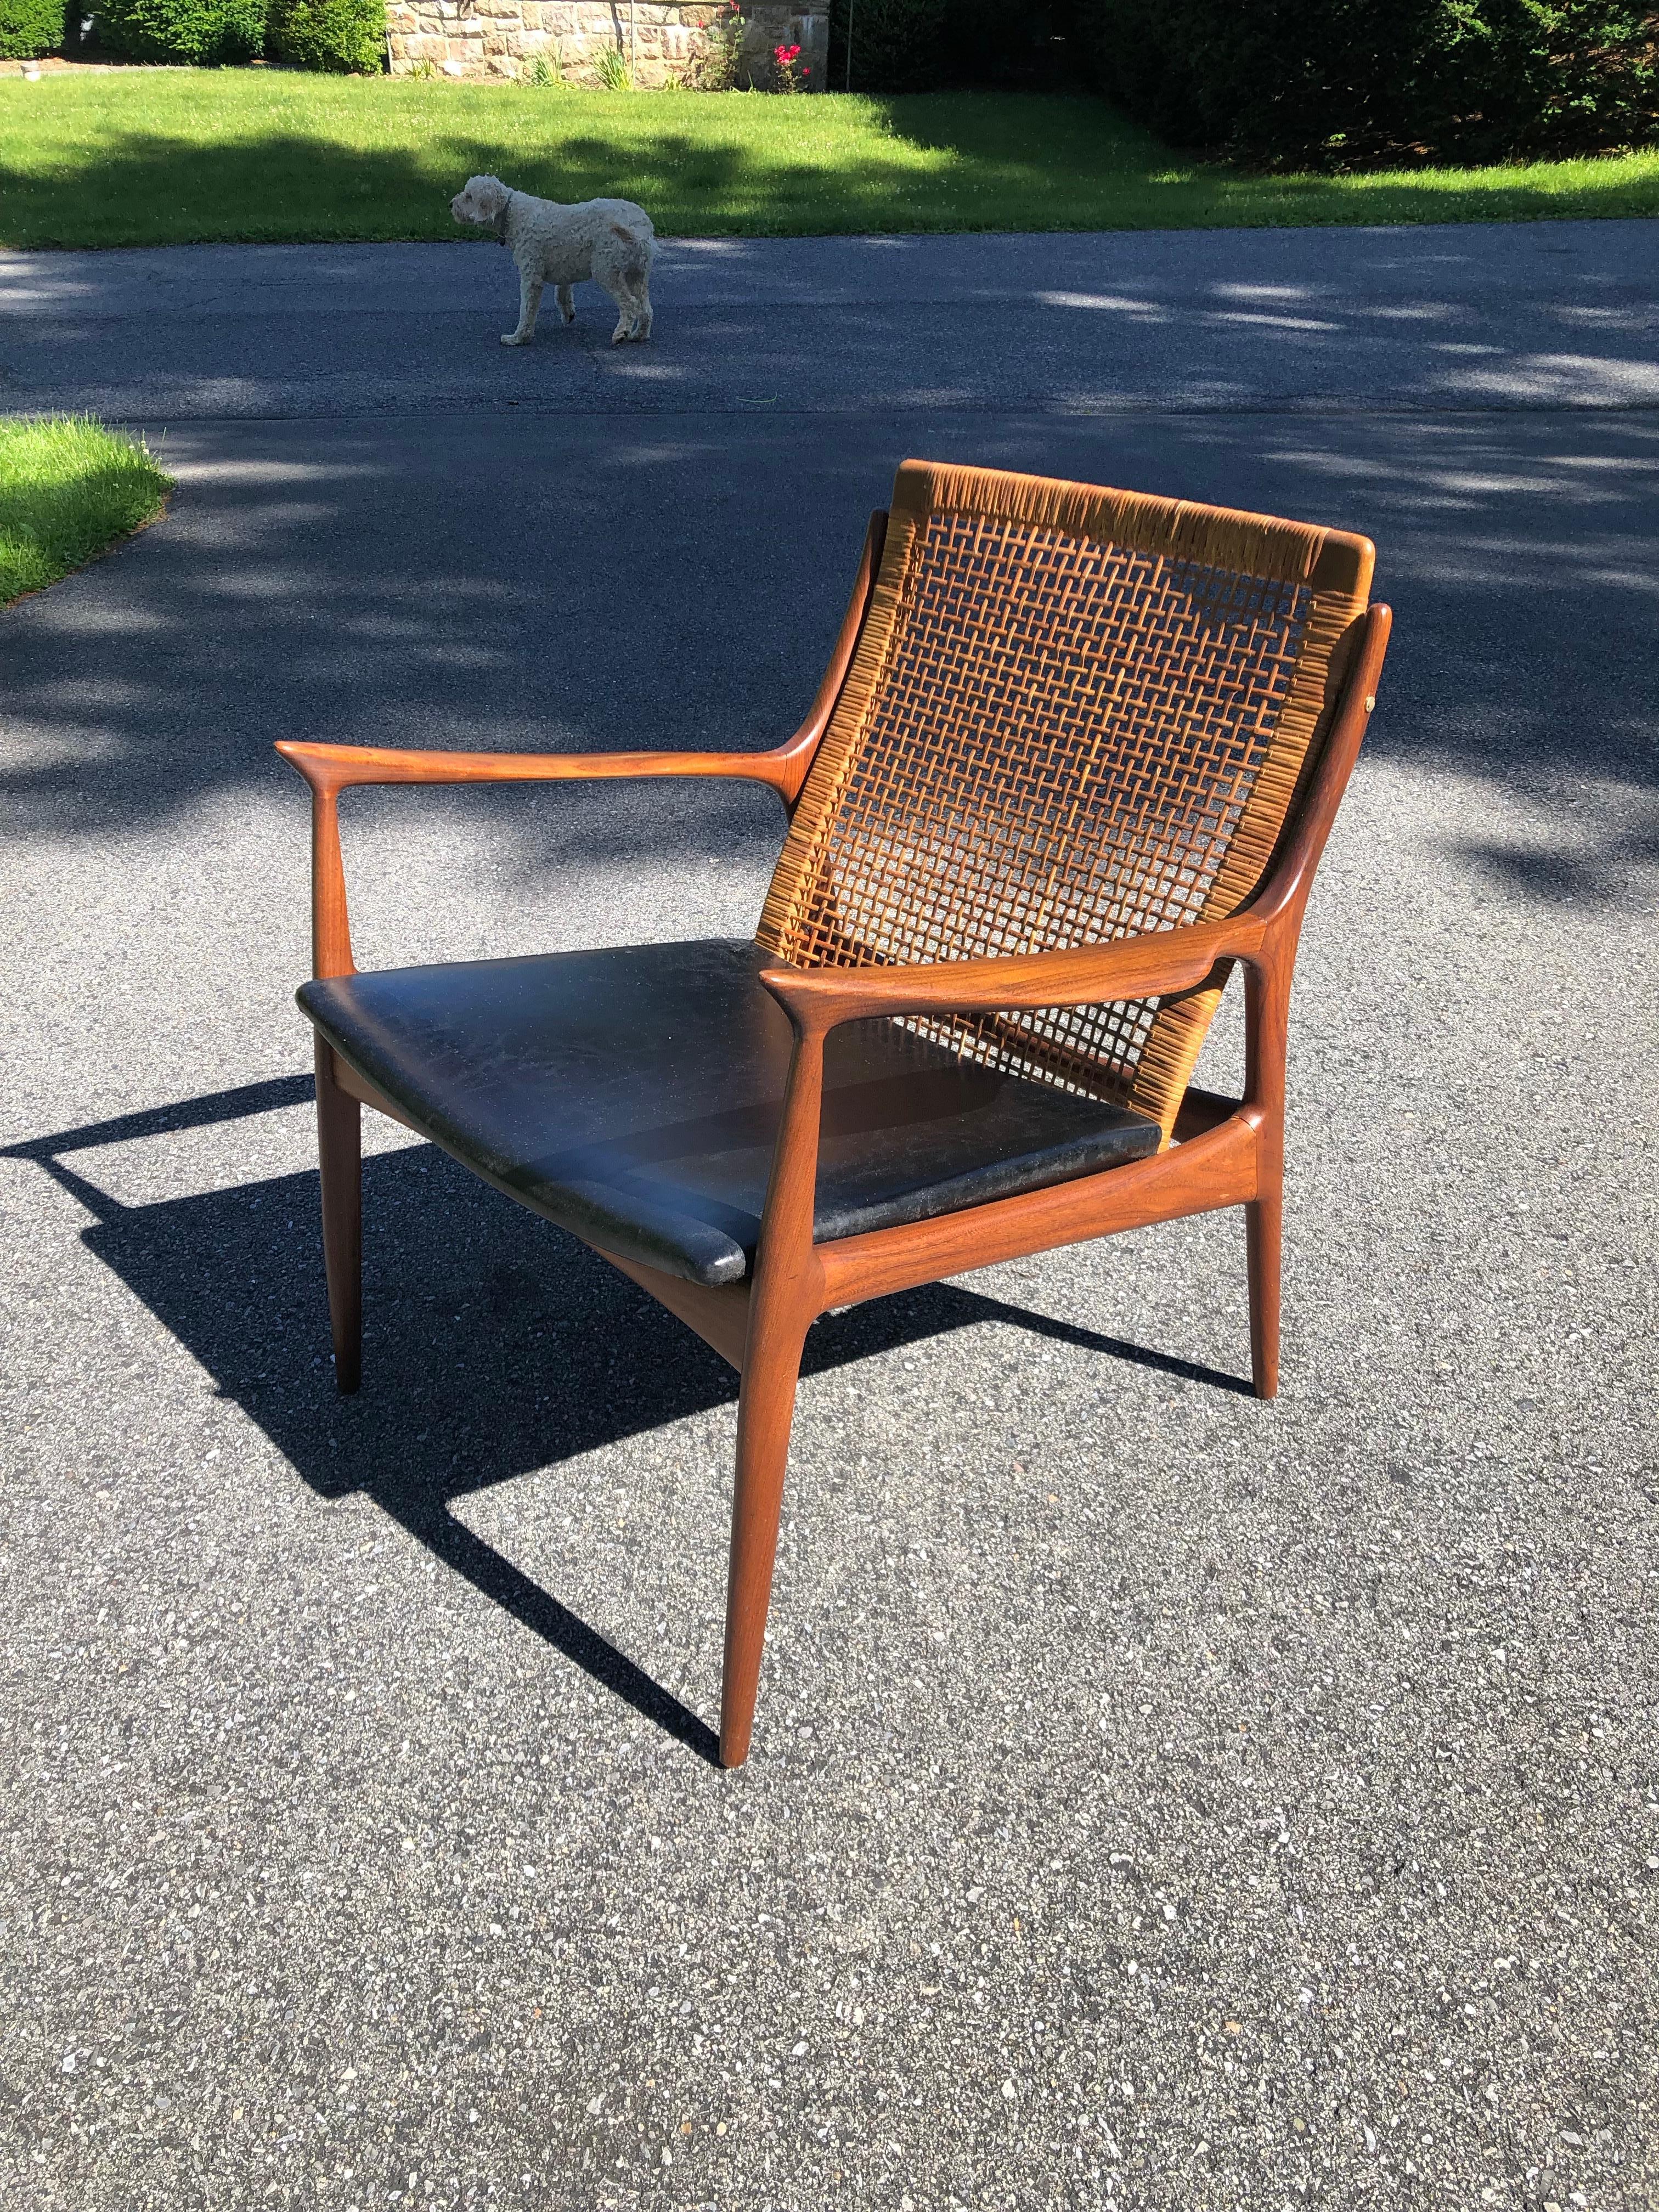 Classic Danish lounge chair by IB Kofod Larsen. A simply beautiful chair with great lines and a stunning profile
Original cane and seat aa
Dimensions 27